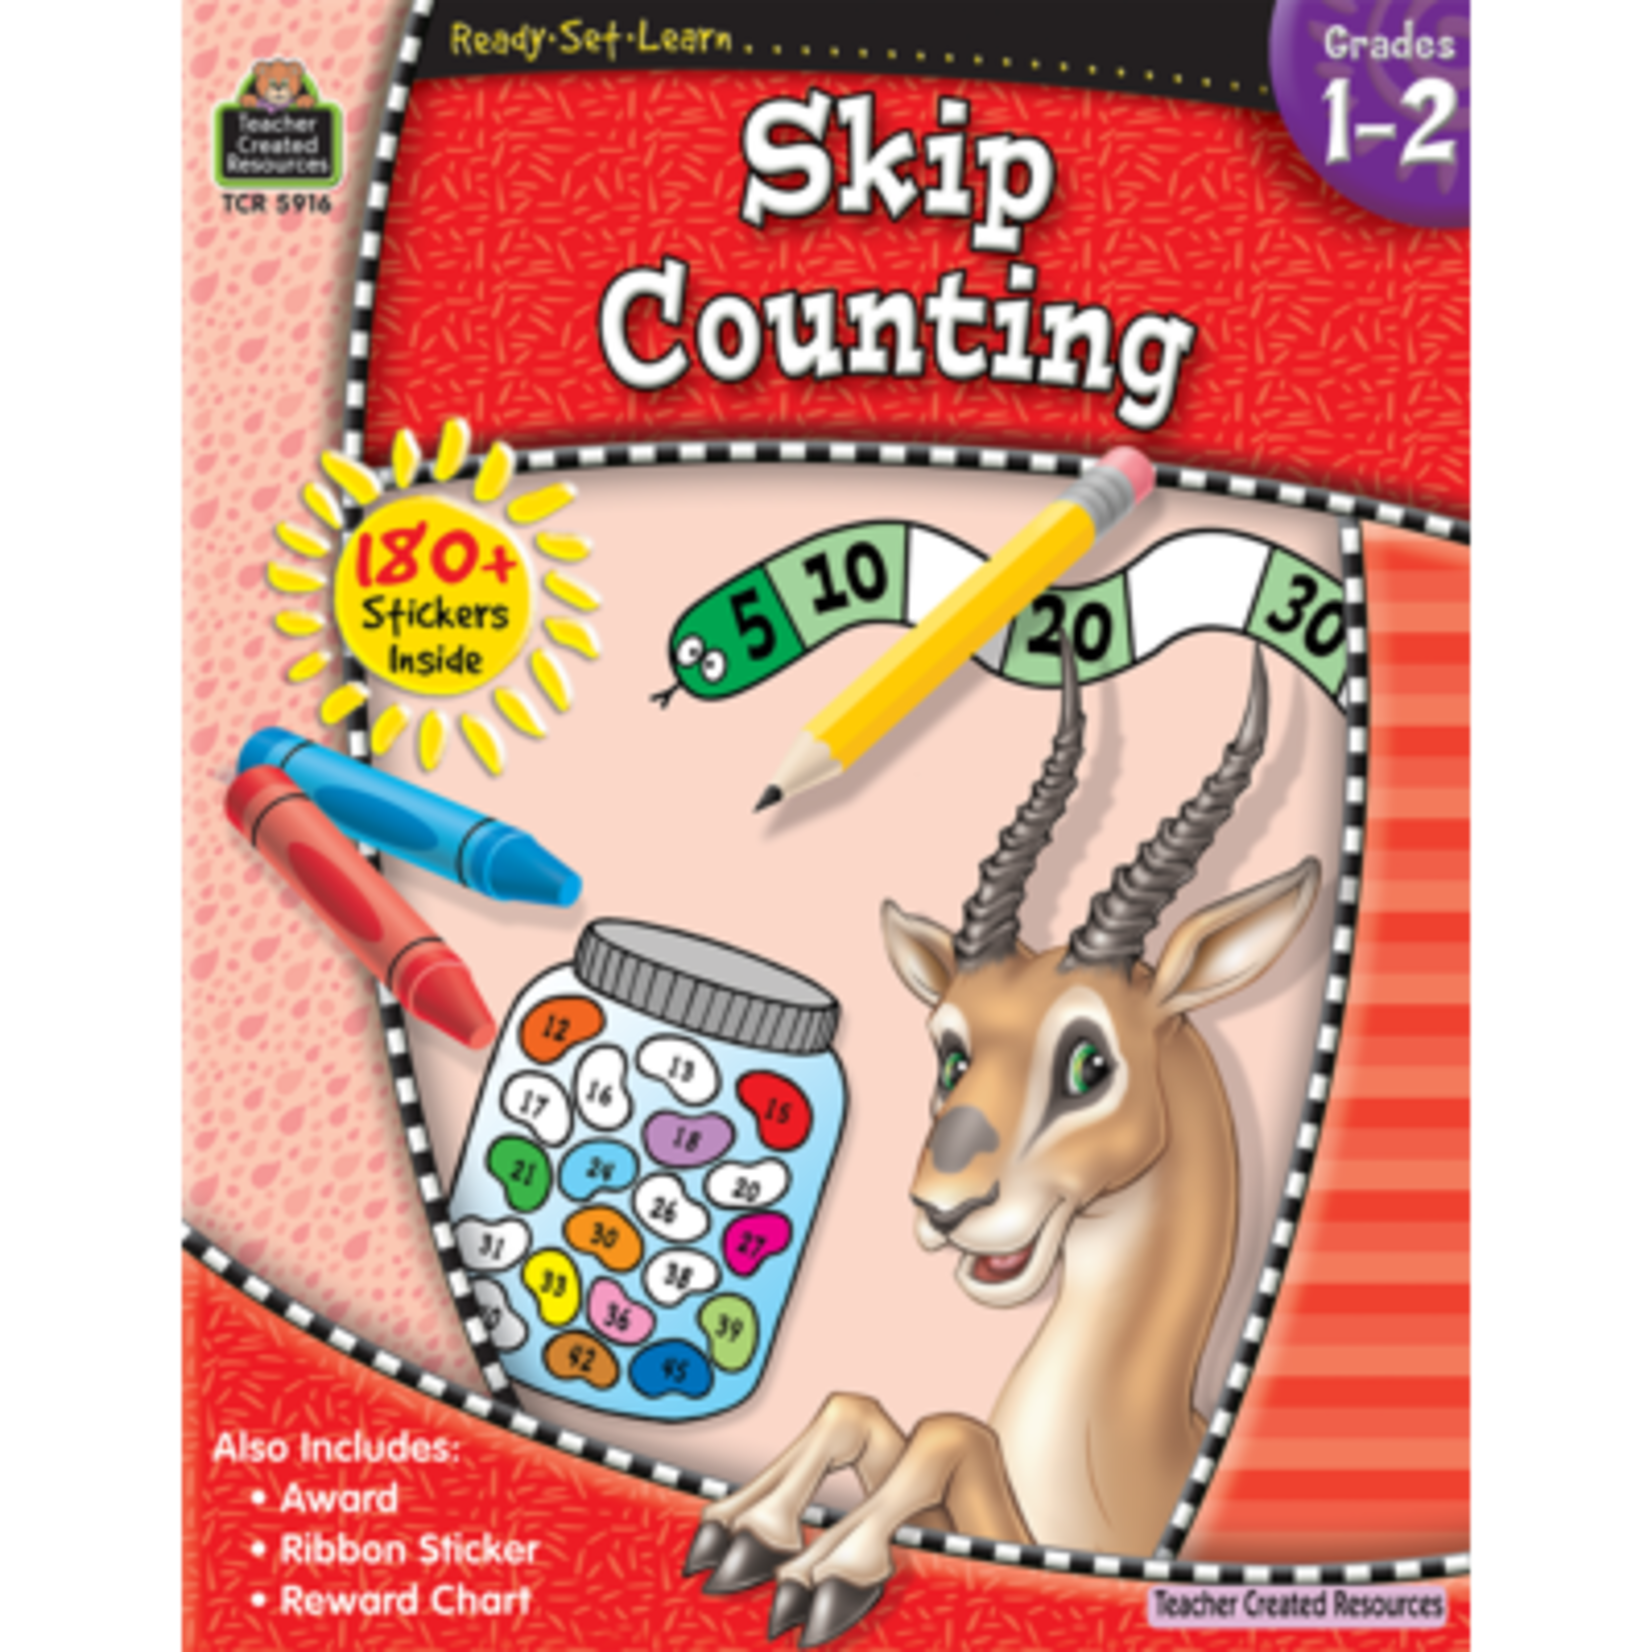 TEACHER CREATED RESOURCES Ready-Set-Learn: Skip Counting Grade 1-2